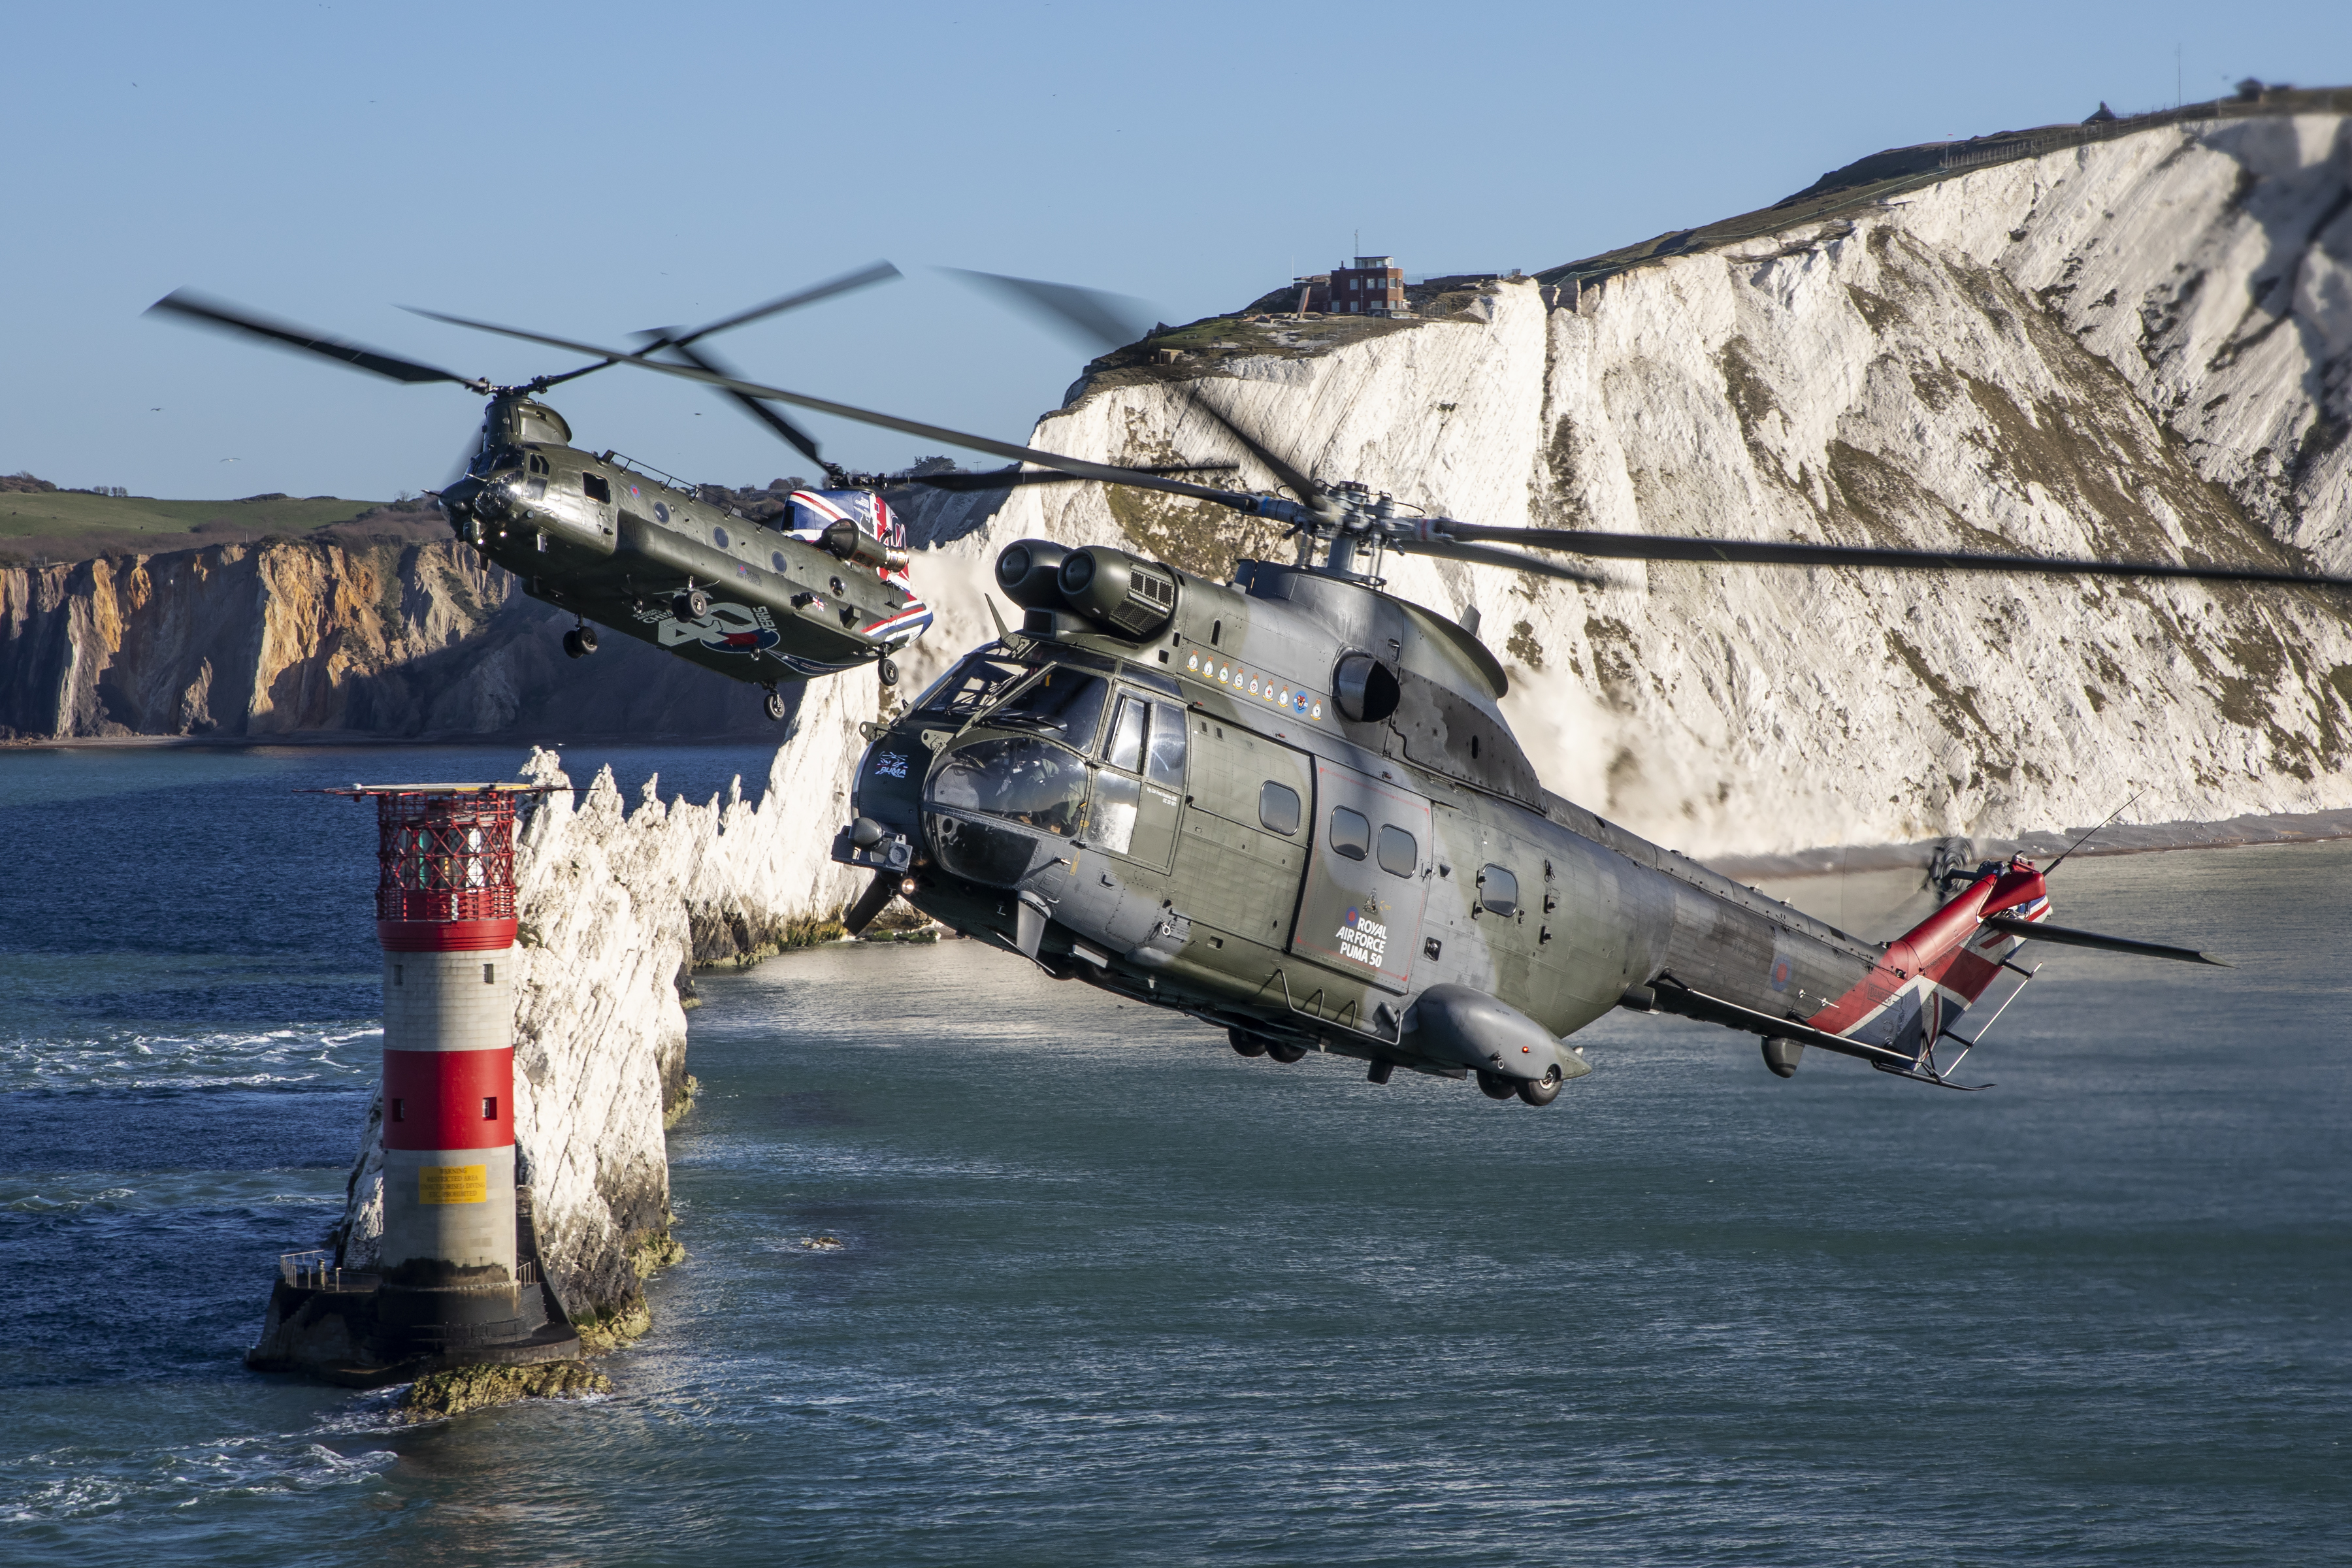 RAF helicopters banking over the white cliffs of dover